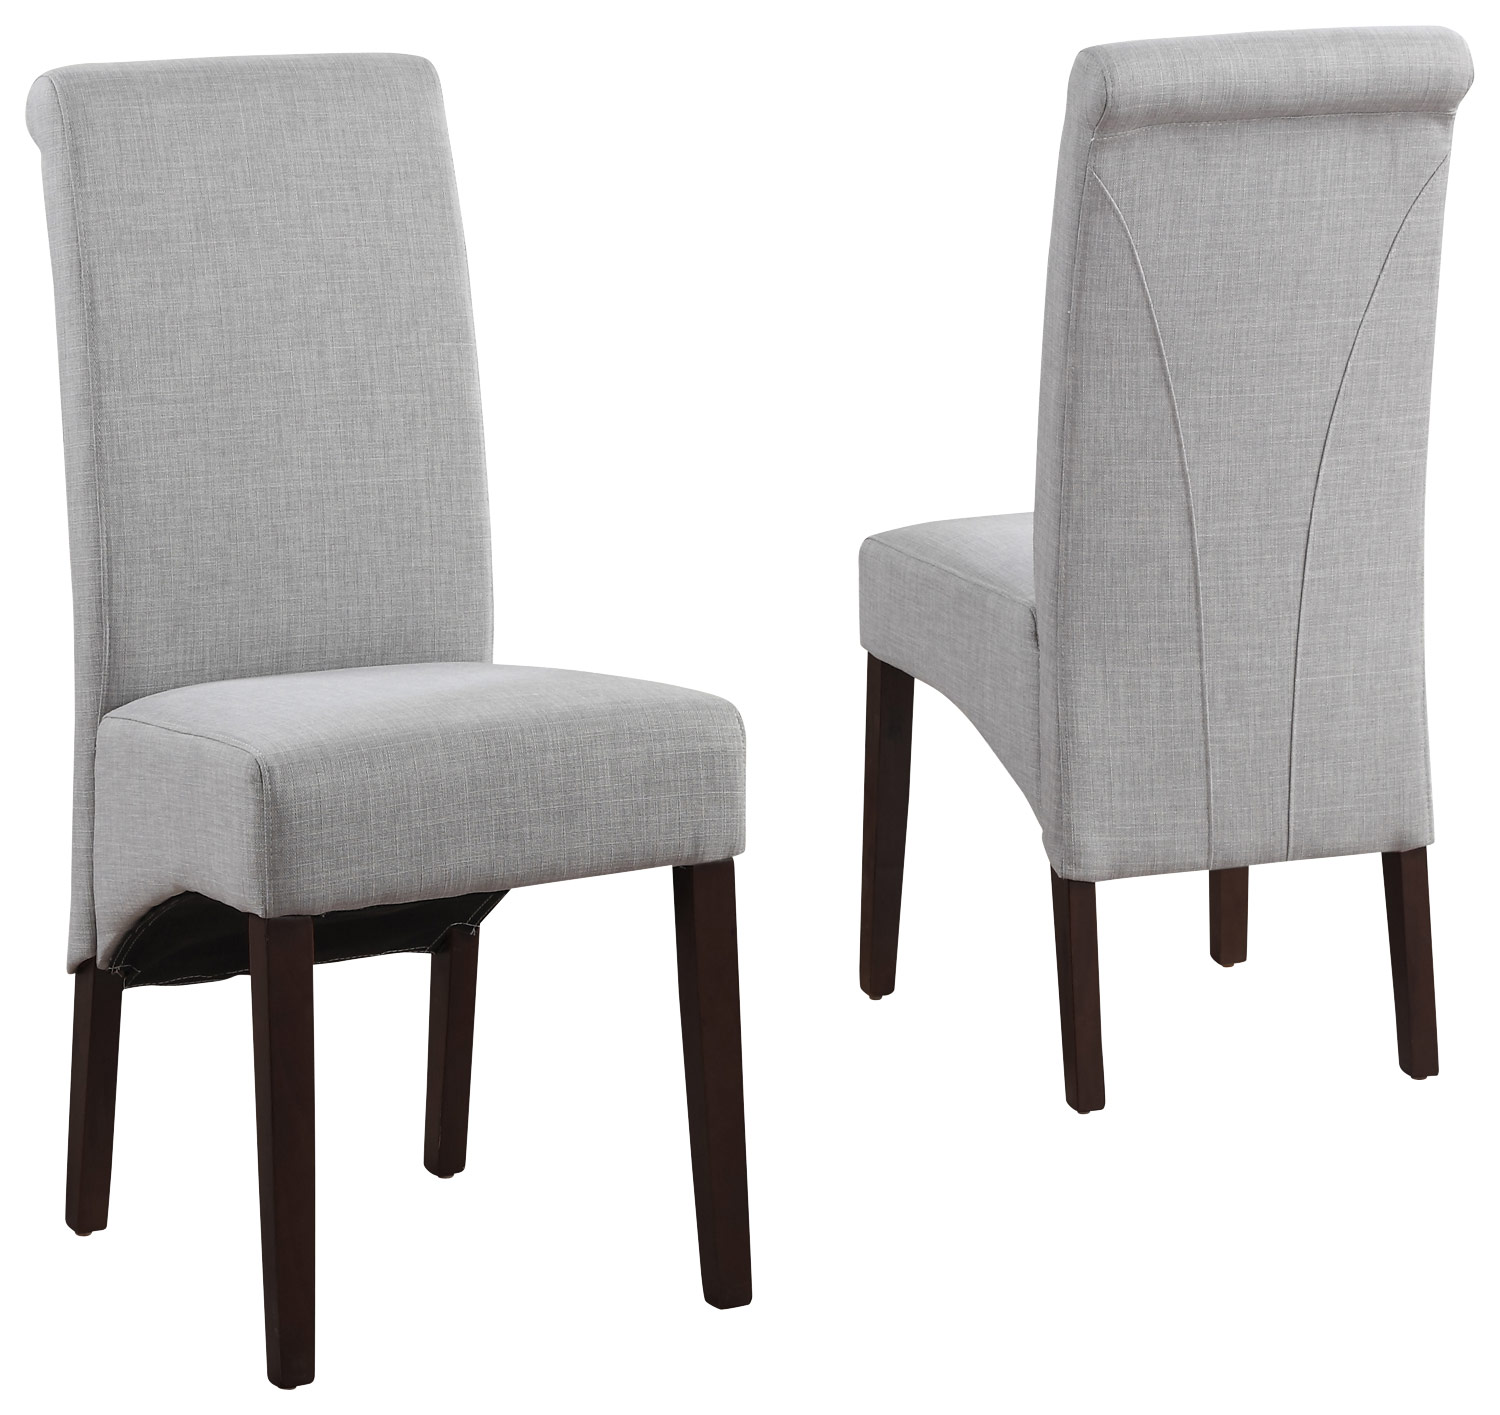 Simpli Home - Avalon Polyester & Wood Dining Chairs (Set of 2) - Dove Gray was $249.99 now $199.99 (20.0% off)